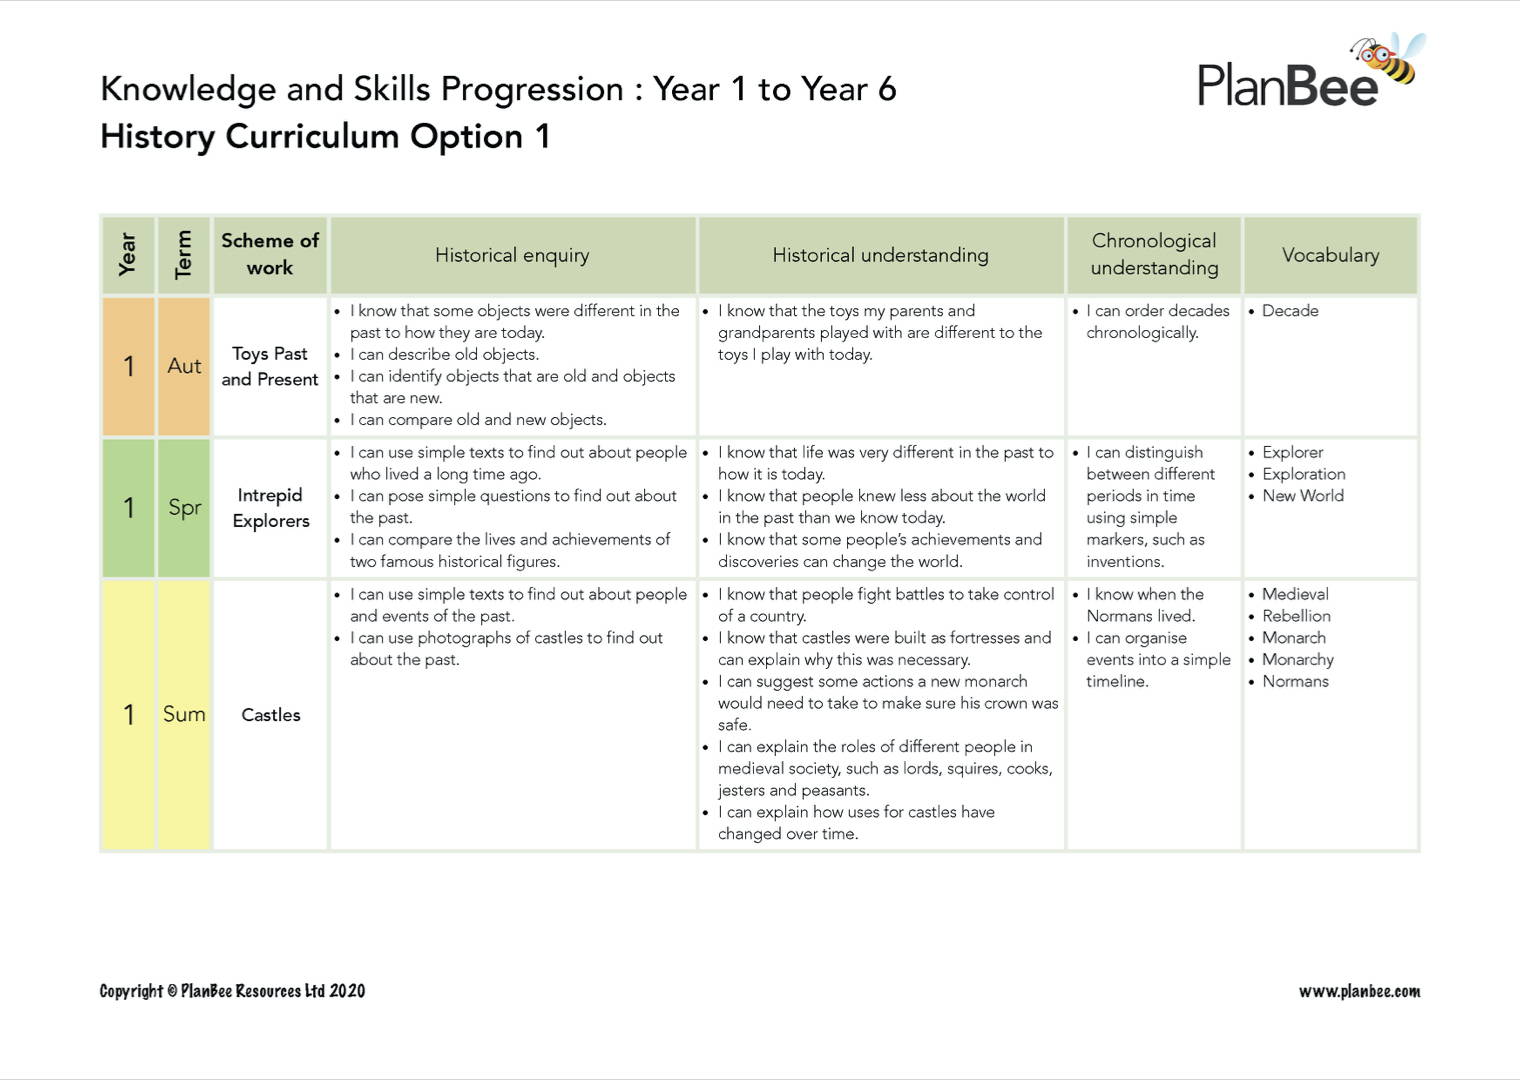 Knowledge and Skills History Curriculum